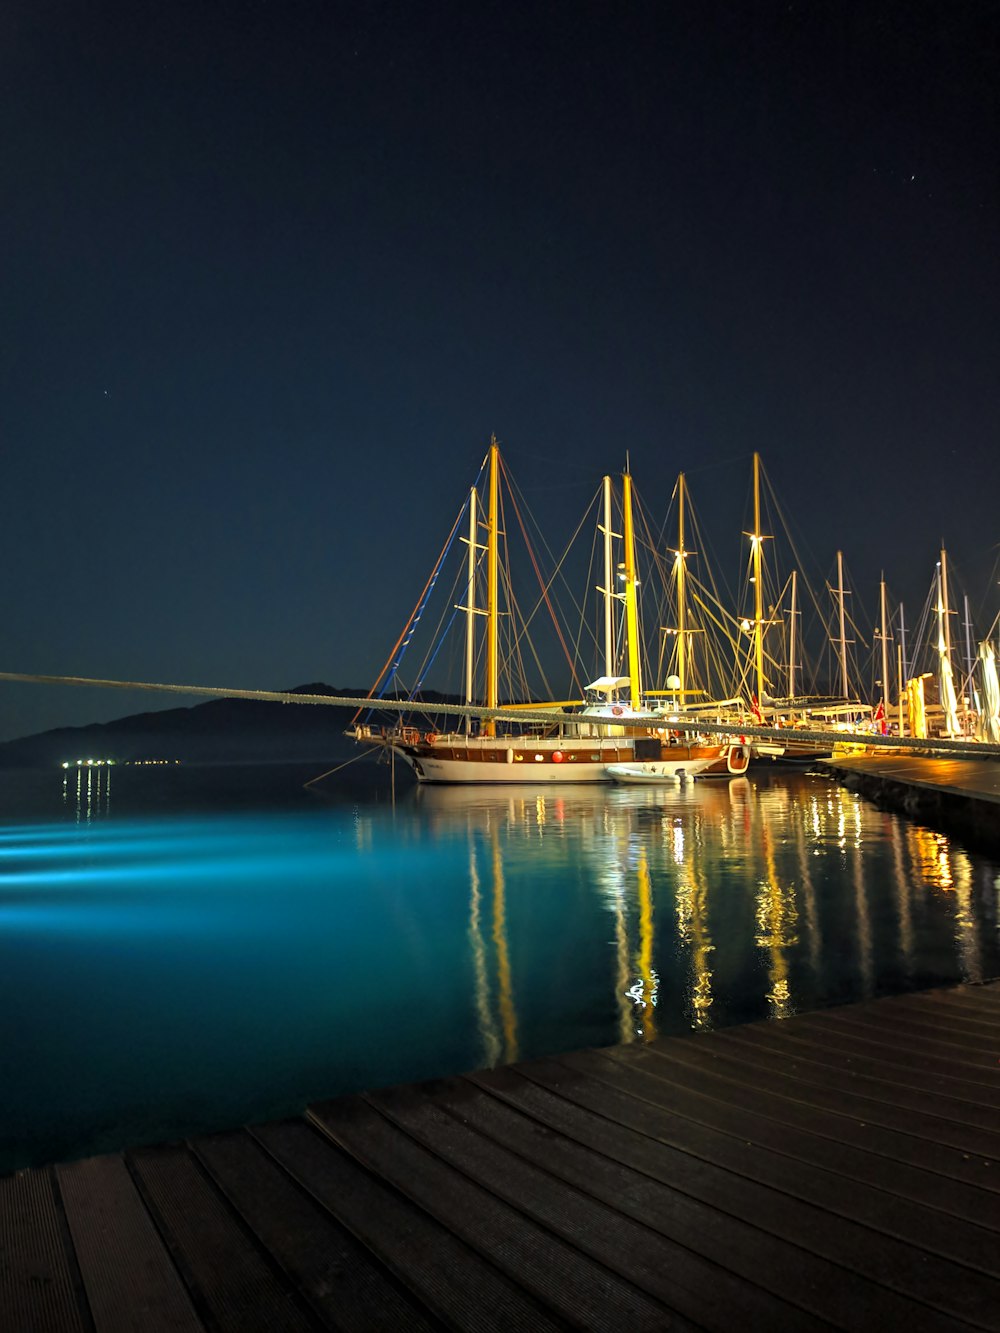 white and brown boat on dock during night time